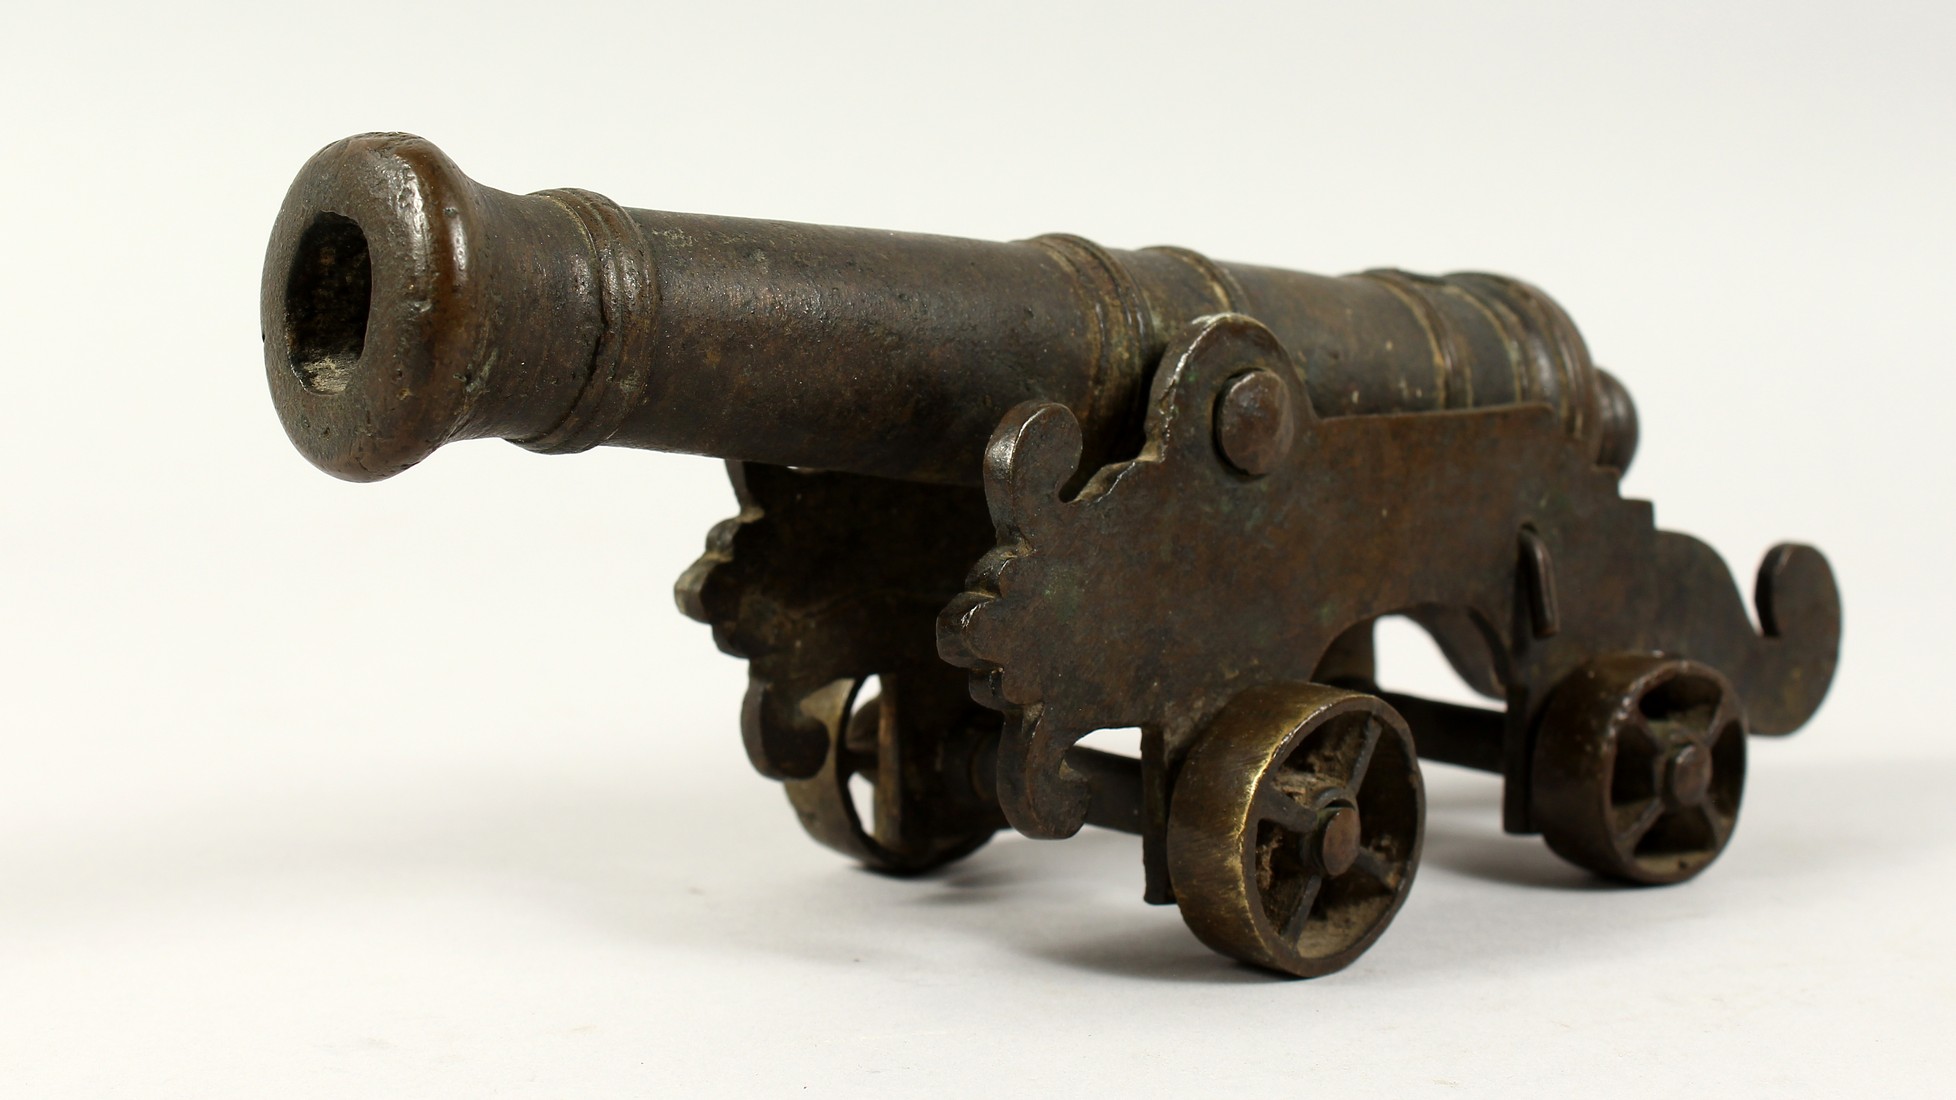 A SMALL EARLY BRONZE STARTER CANNON on bronze stand. 10ins long.